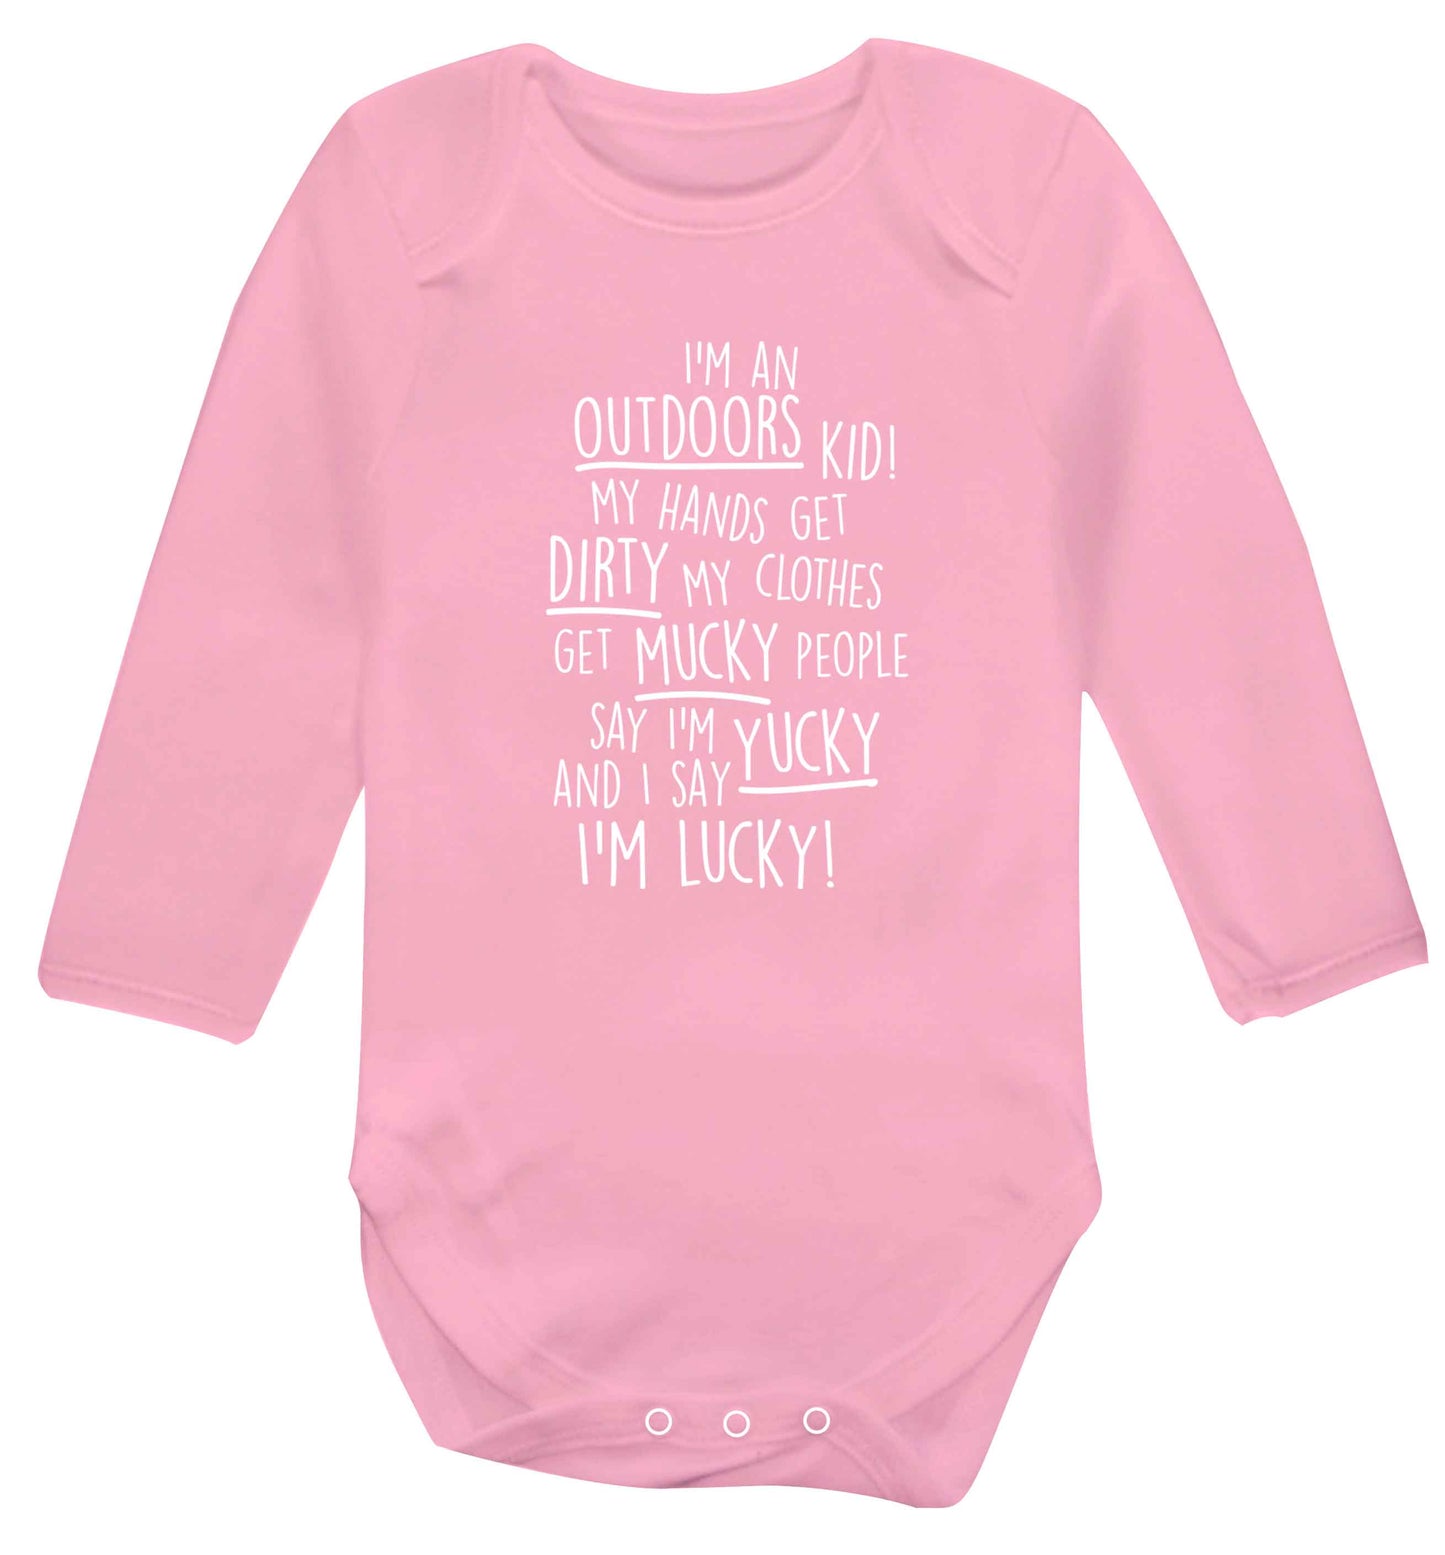 I'm an outdoors kid poem Baby Vest long sleeved pale pink 6-12 months